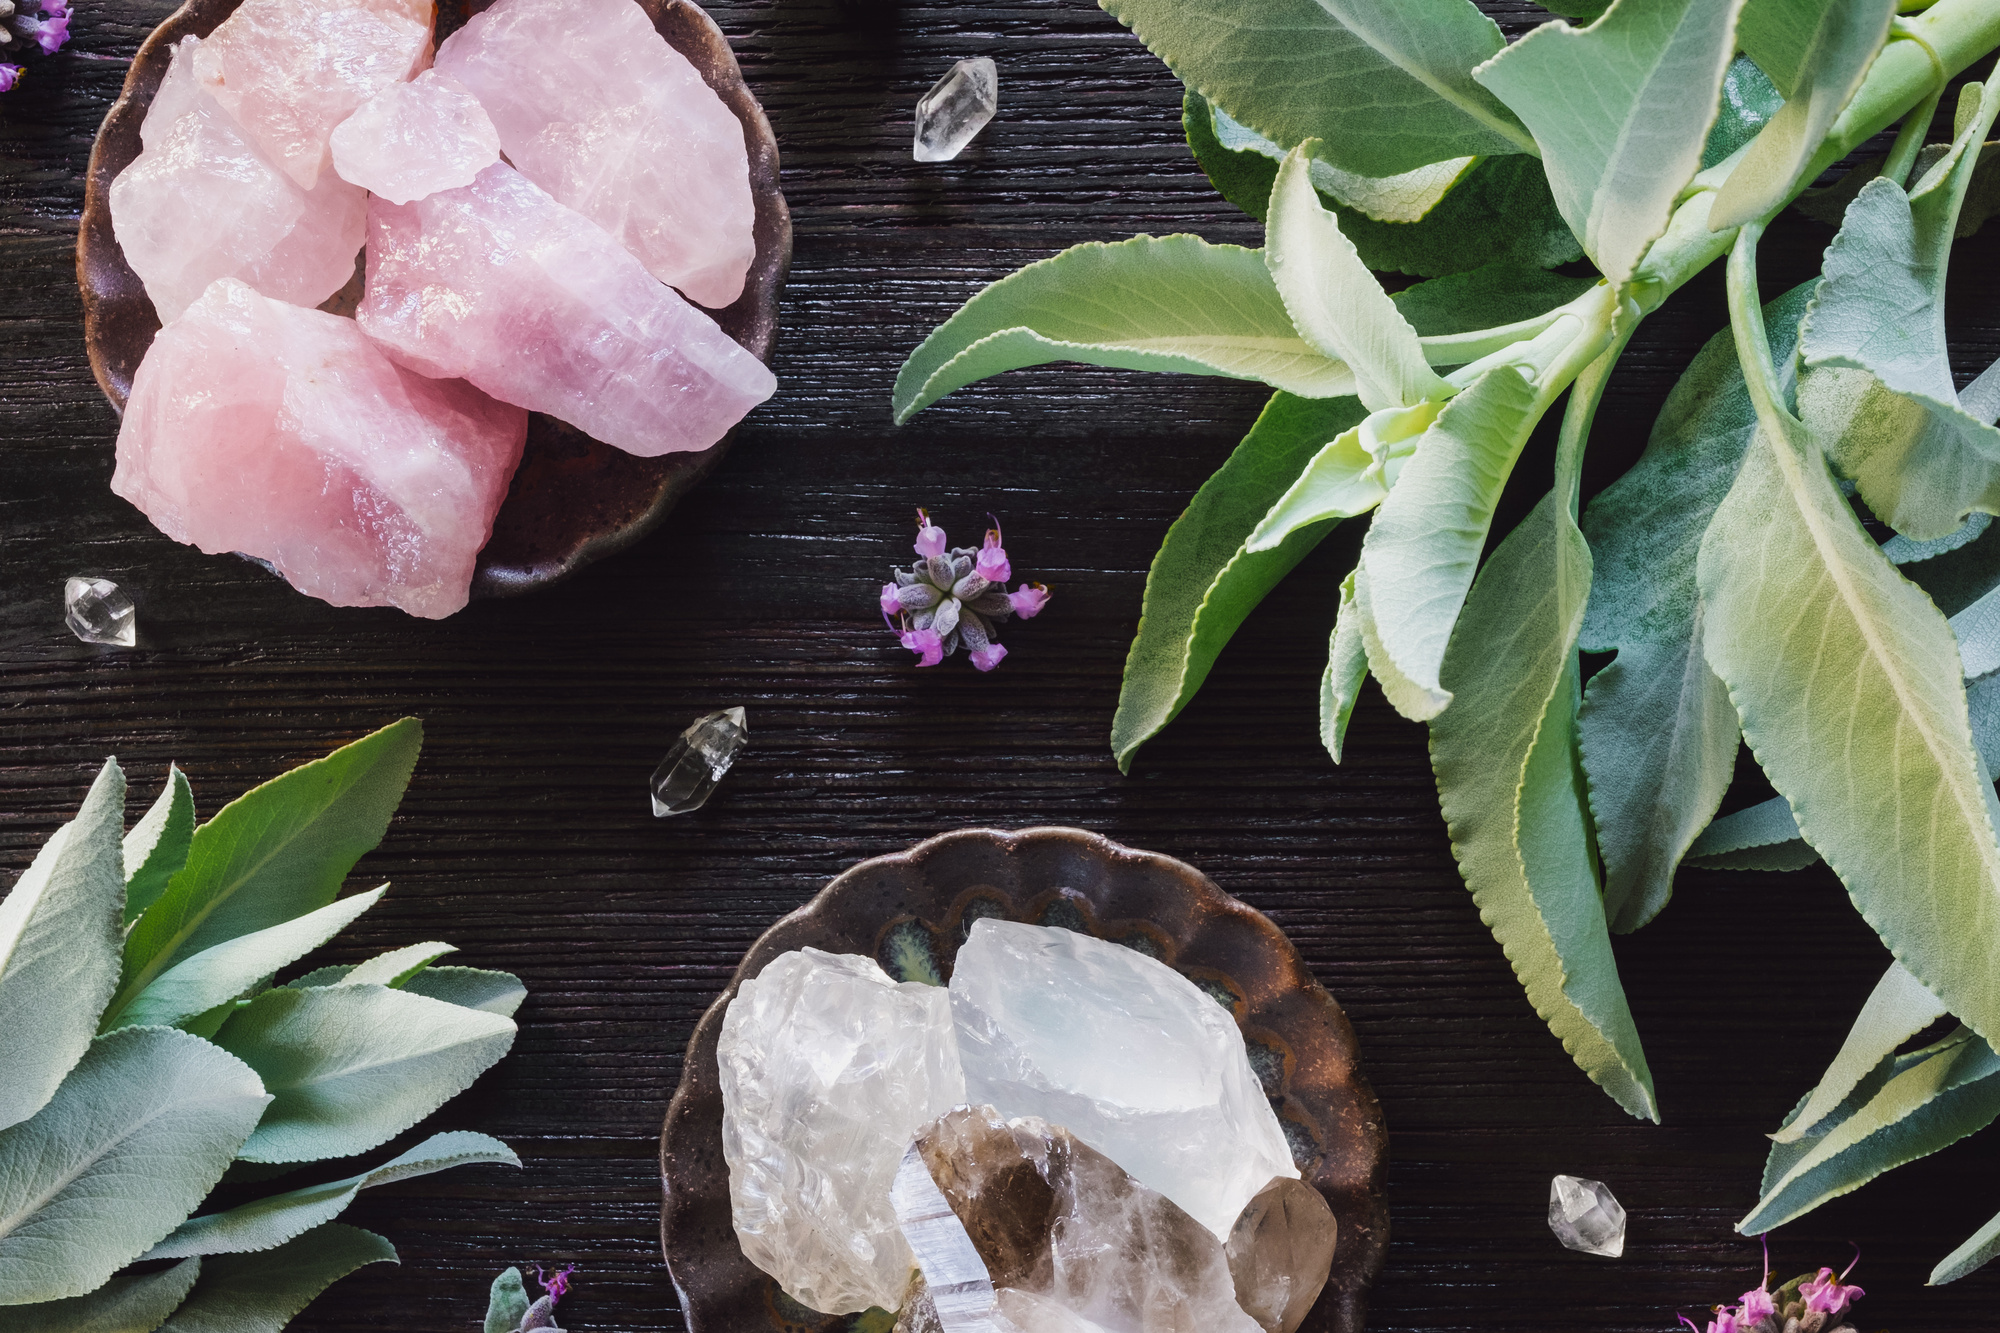 Decorating With Crystals: Where to Place Crystals in Your Home